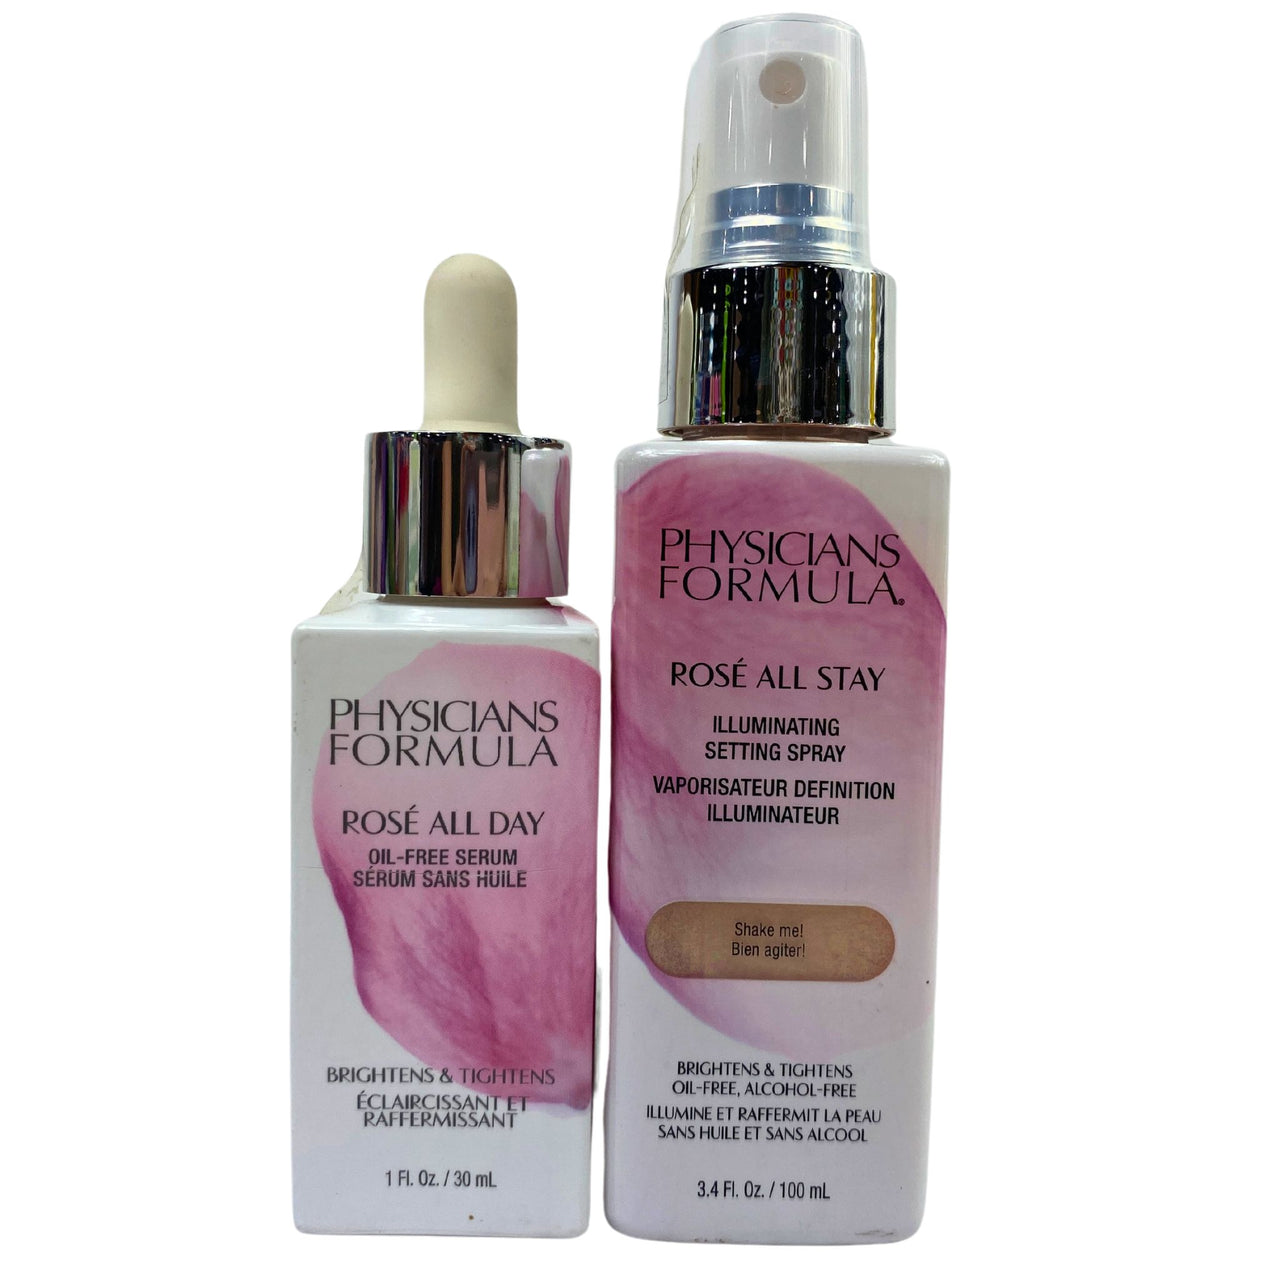 Physicians Formula Rose All Day Oil-Free Serum Brightens & Tightens